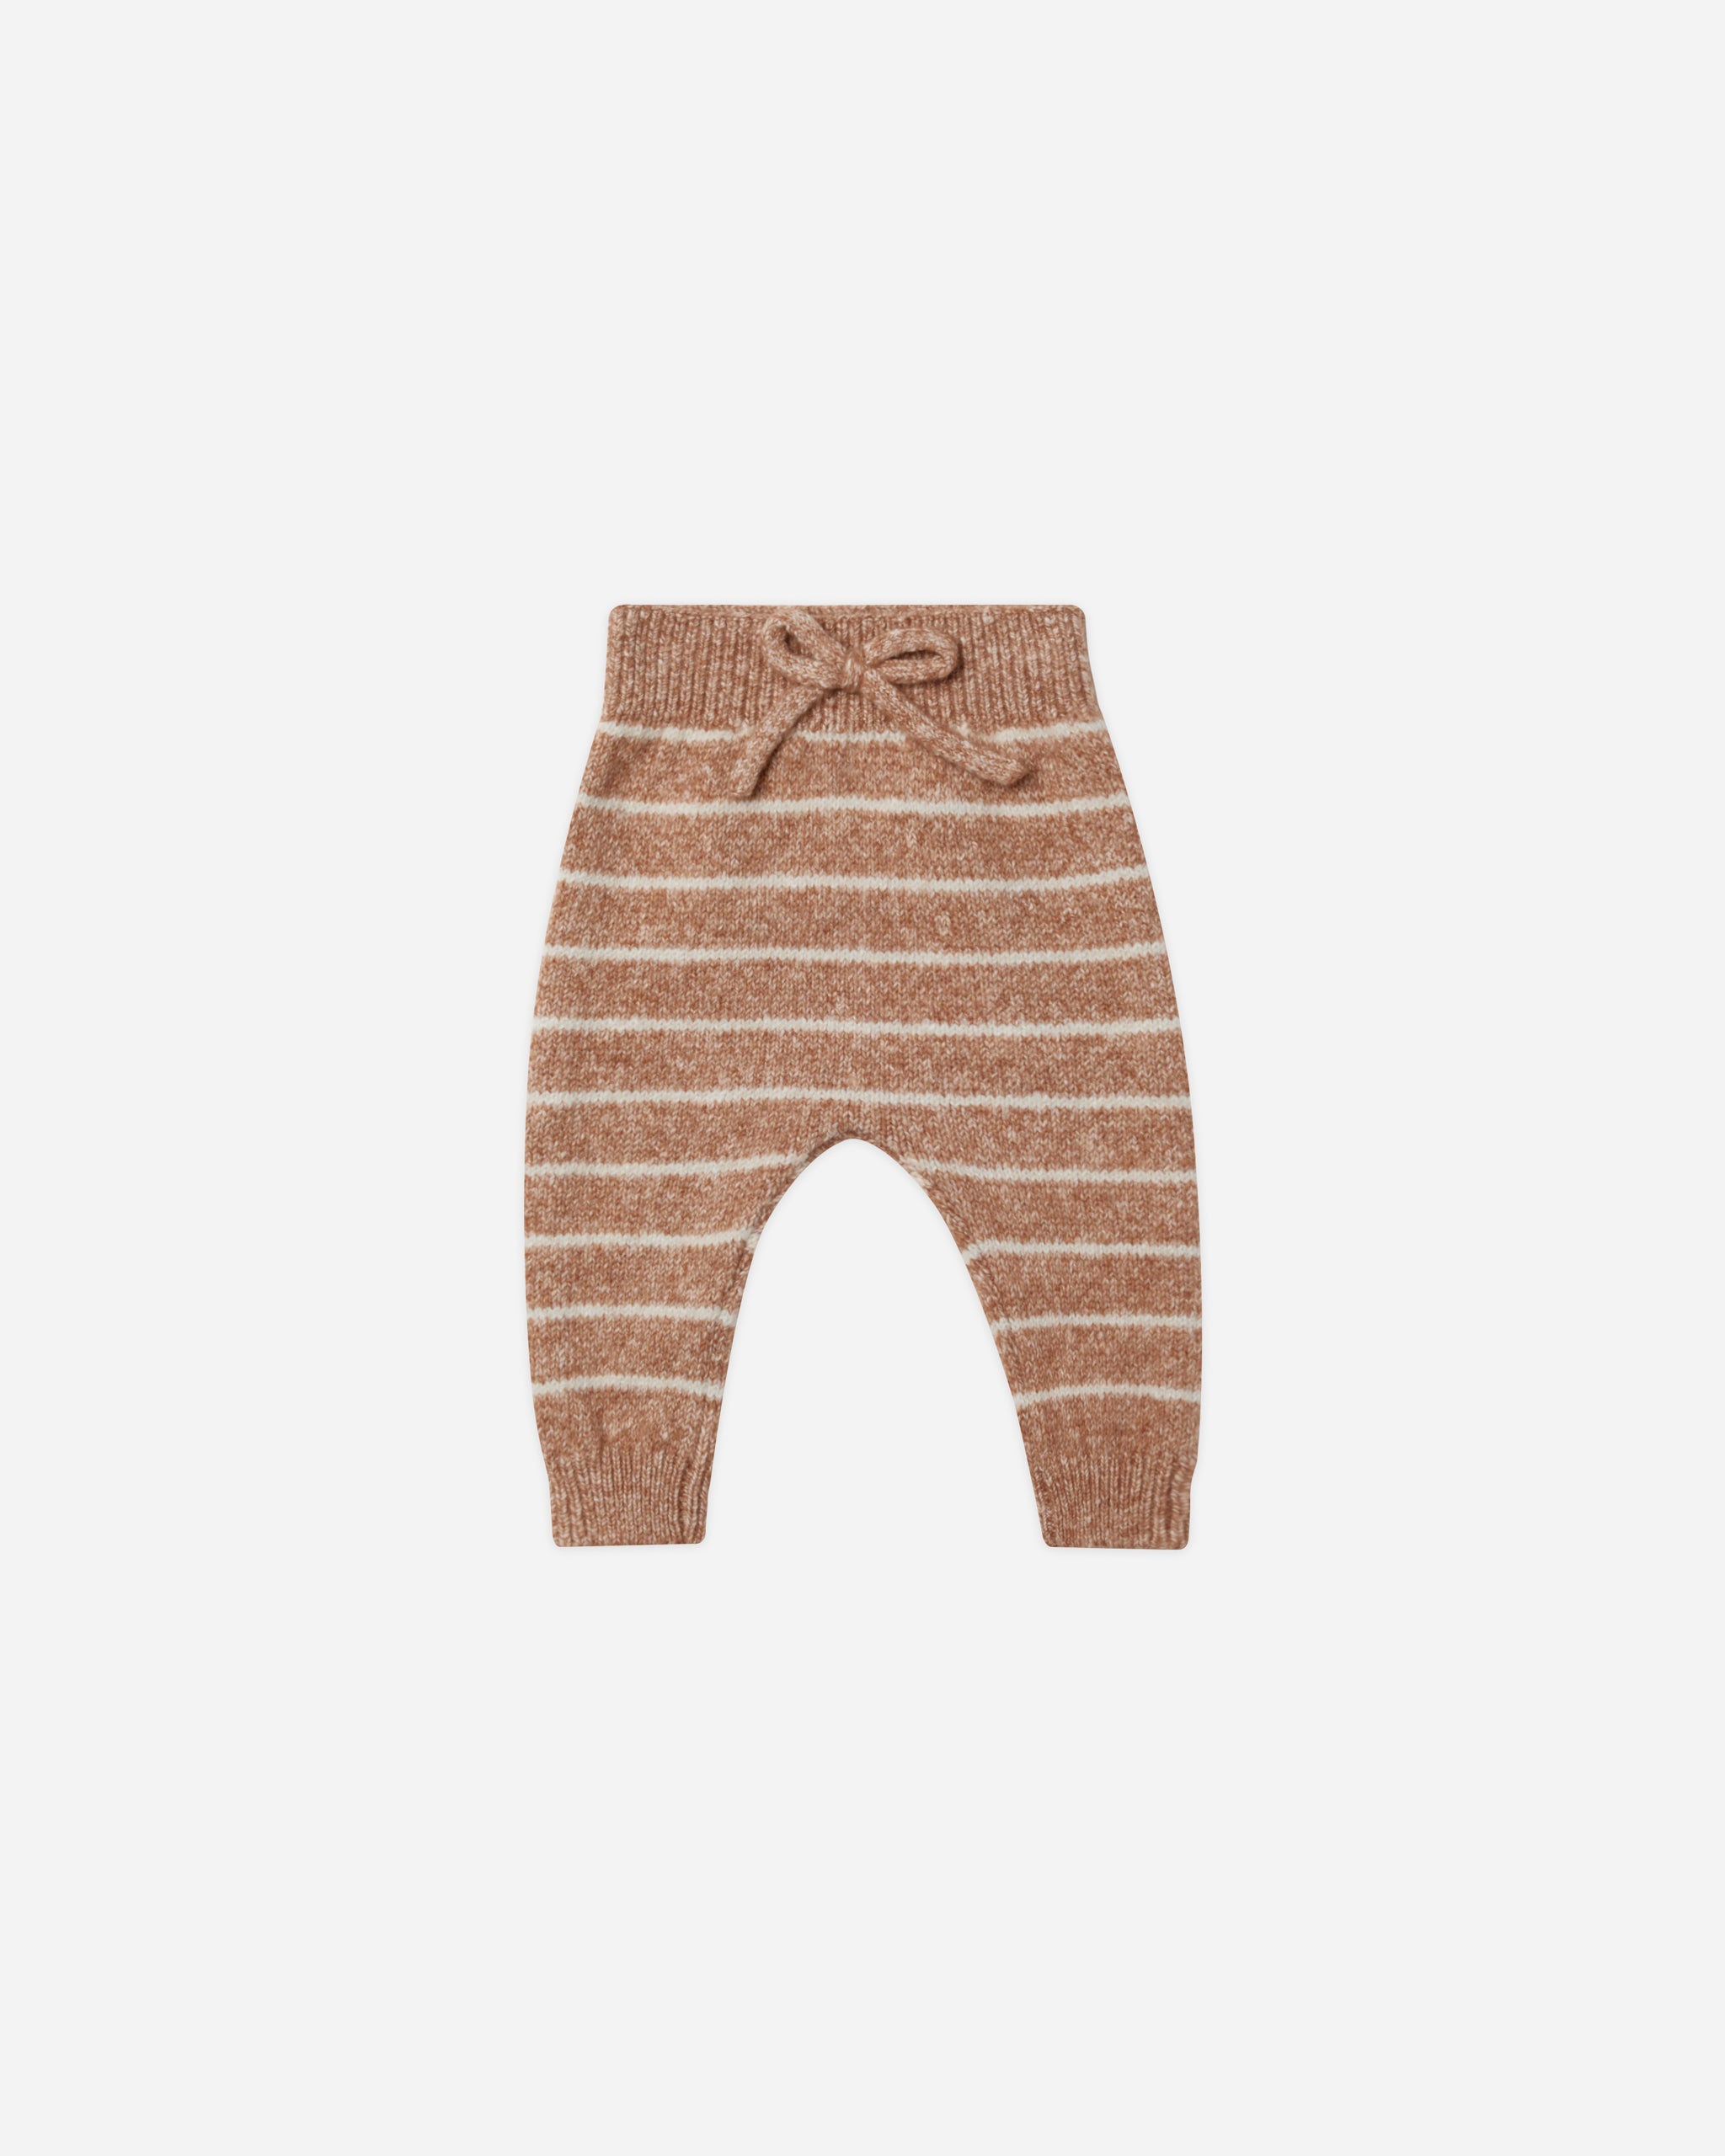 Knit Pant || Cinnamon Stripe - Rylee + Cru | Kids Clothes | Trendy Baby Clothes | Modern Infant Outfits |